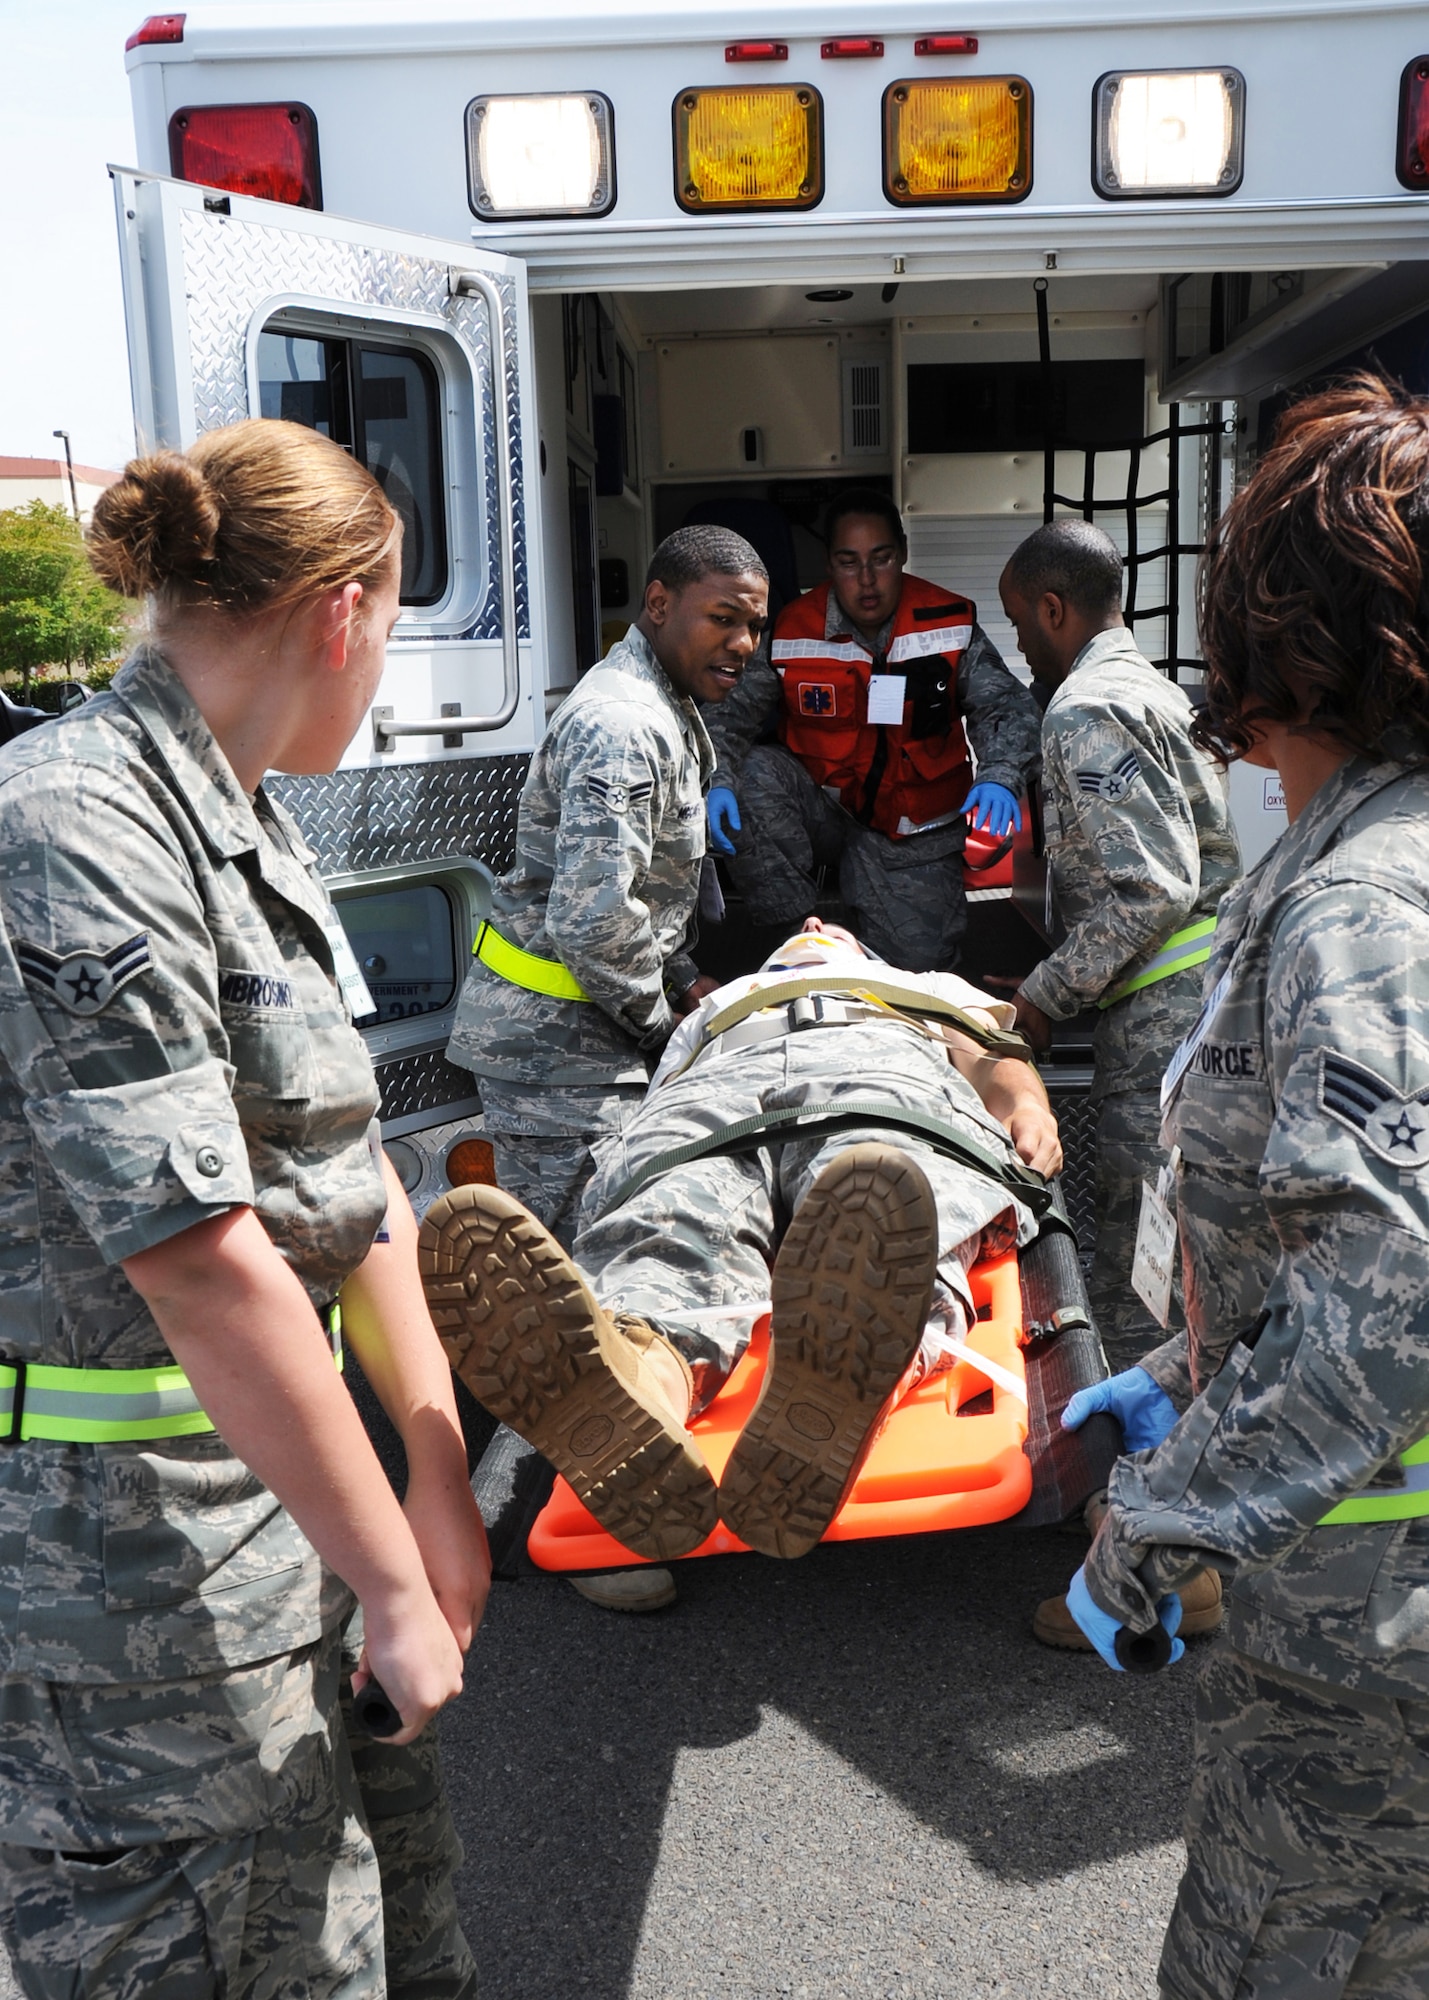 During  an emergency response exercise at Travis Air Force Base, California medical emergency response personal work together to transport a simulated victim to a waiting ambulance. (U.S. Air Force photo by Civ/Jay Trottier)